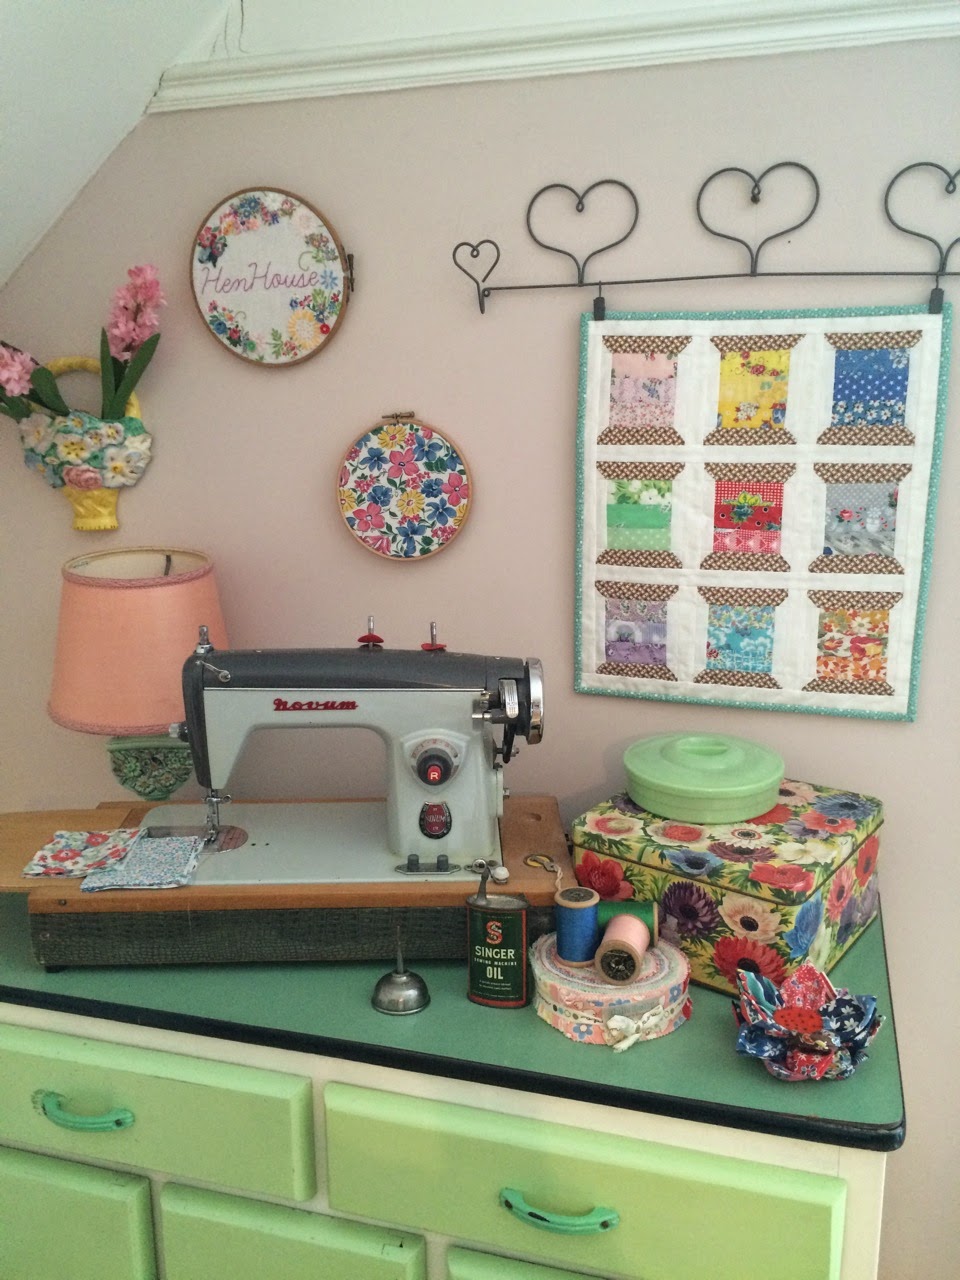 HenHouse: My Quilting Room..and News!